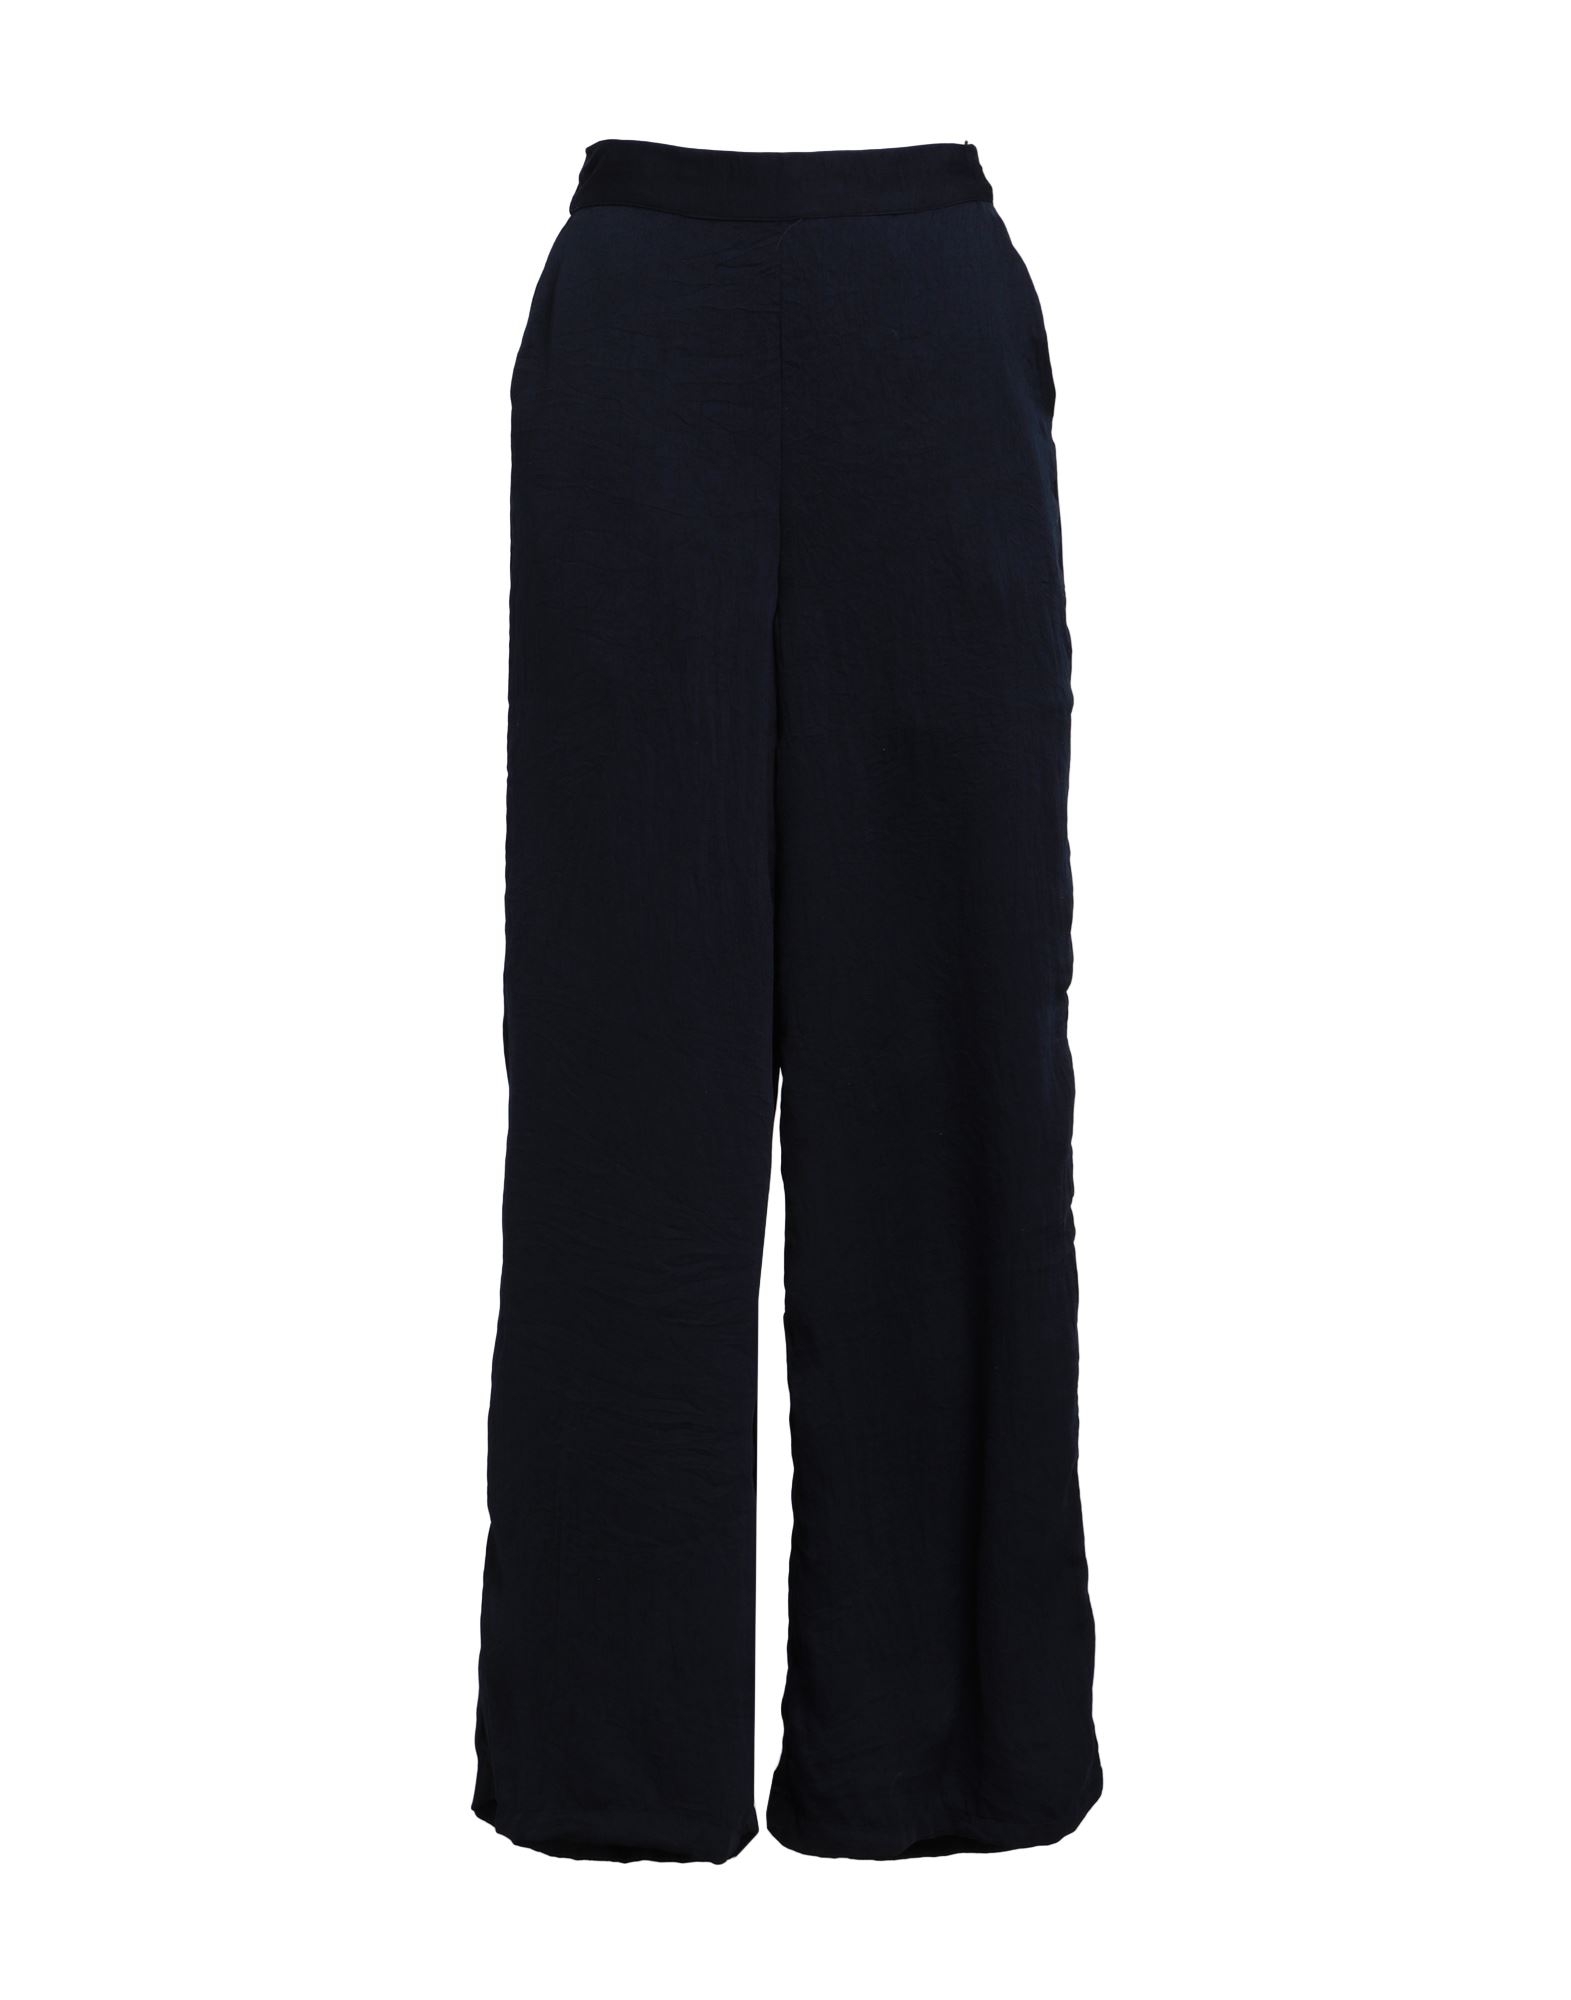 Vero Moda Woman Pants Midnight Blue Size L Recycled Polyester